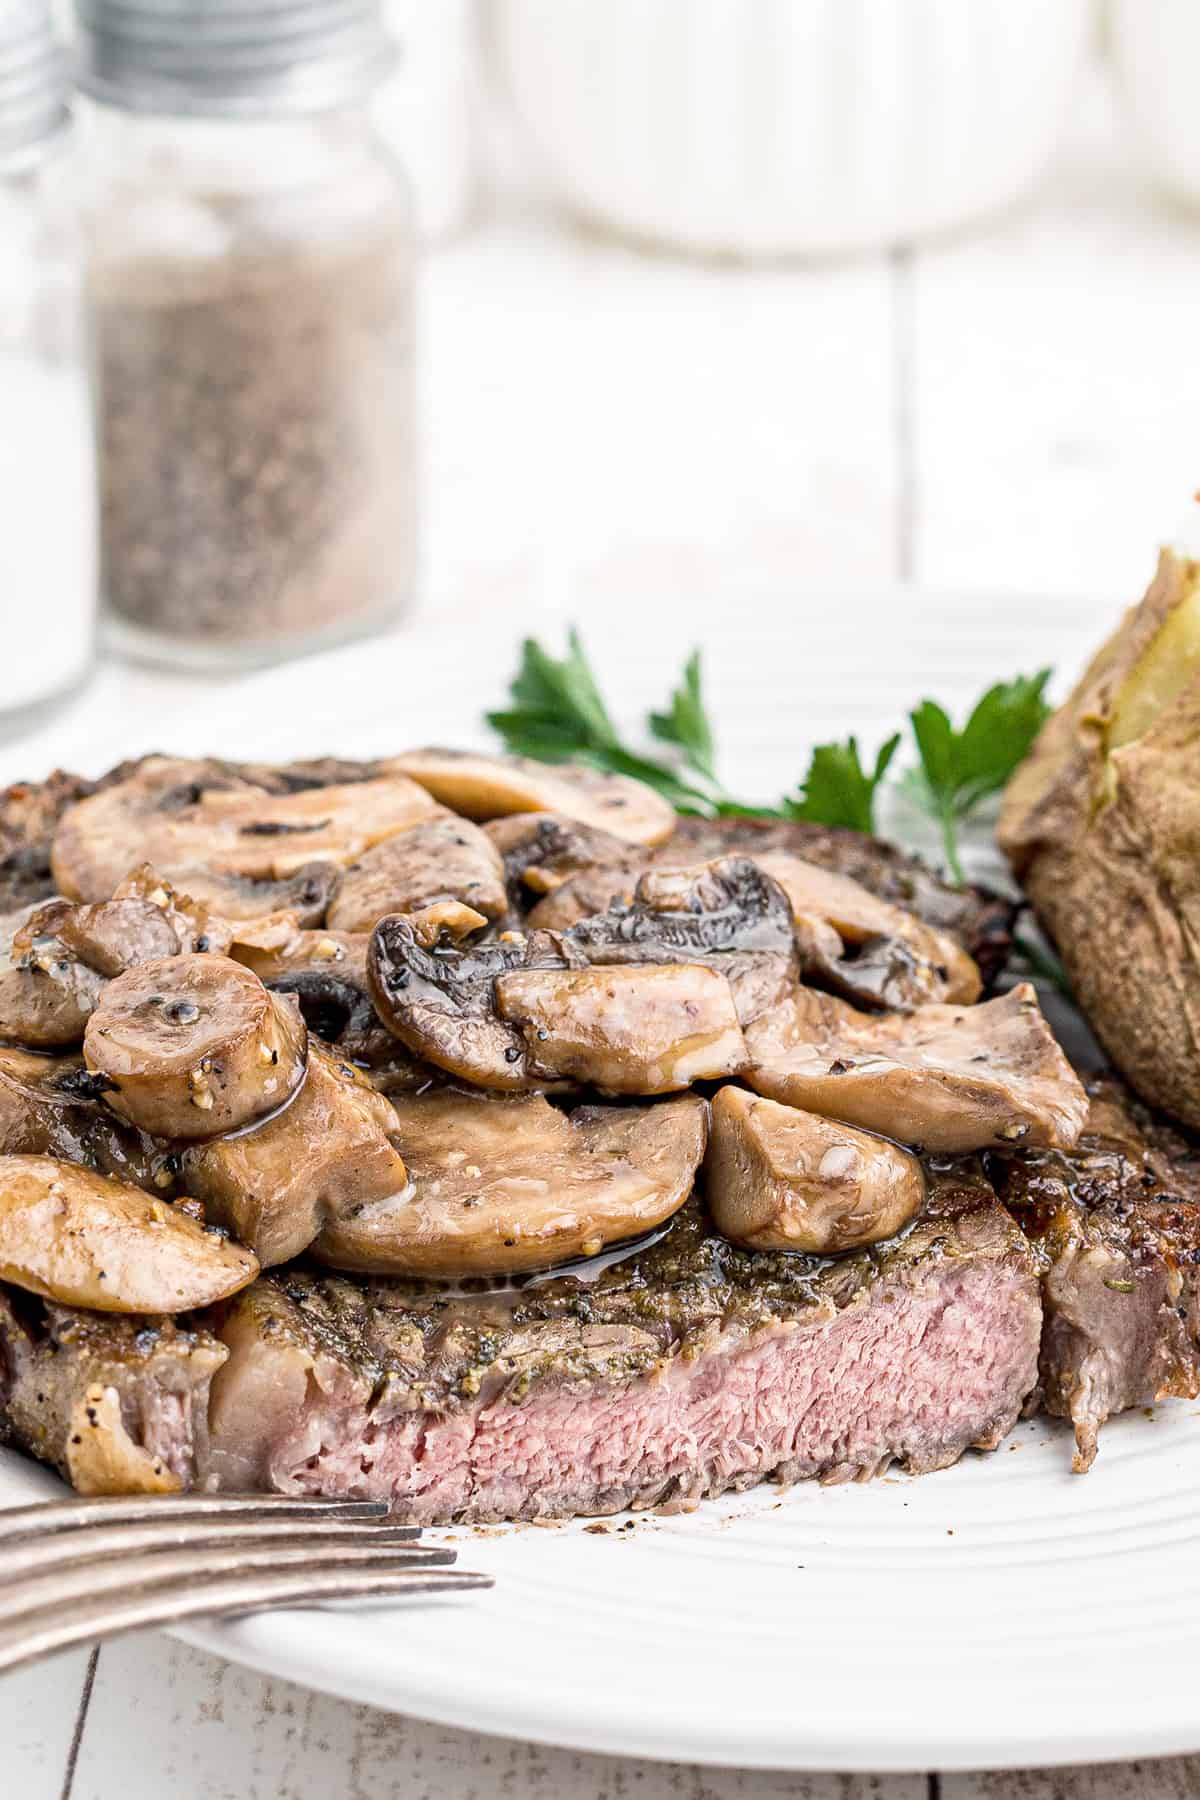 A ribeye steak with baked potatoes and mushrooms on a white plate.